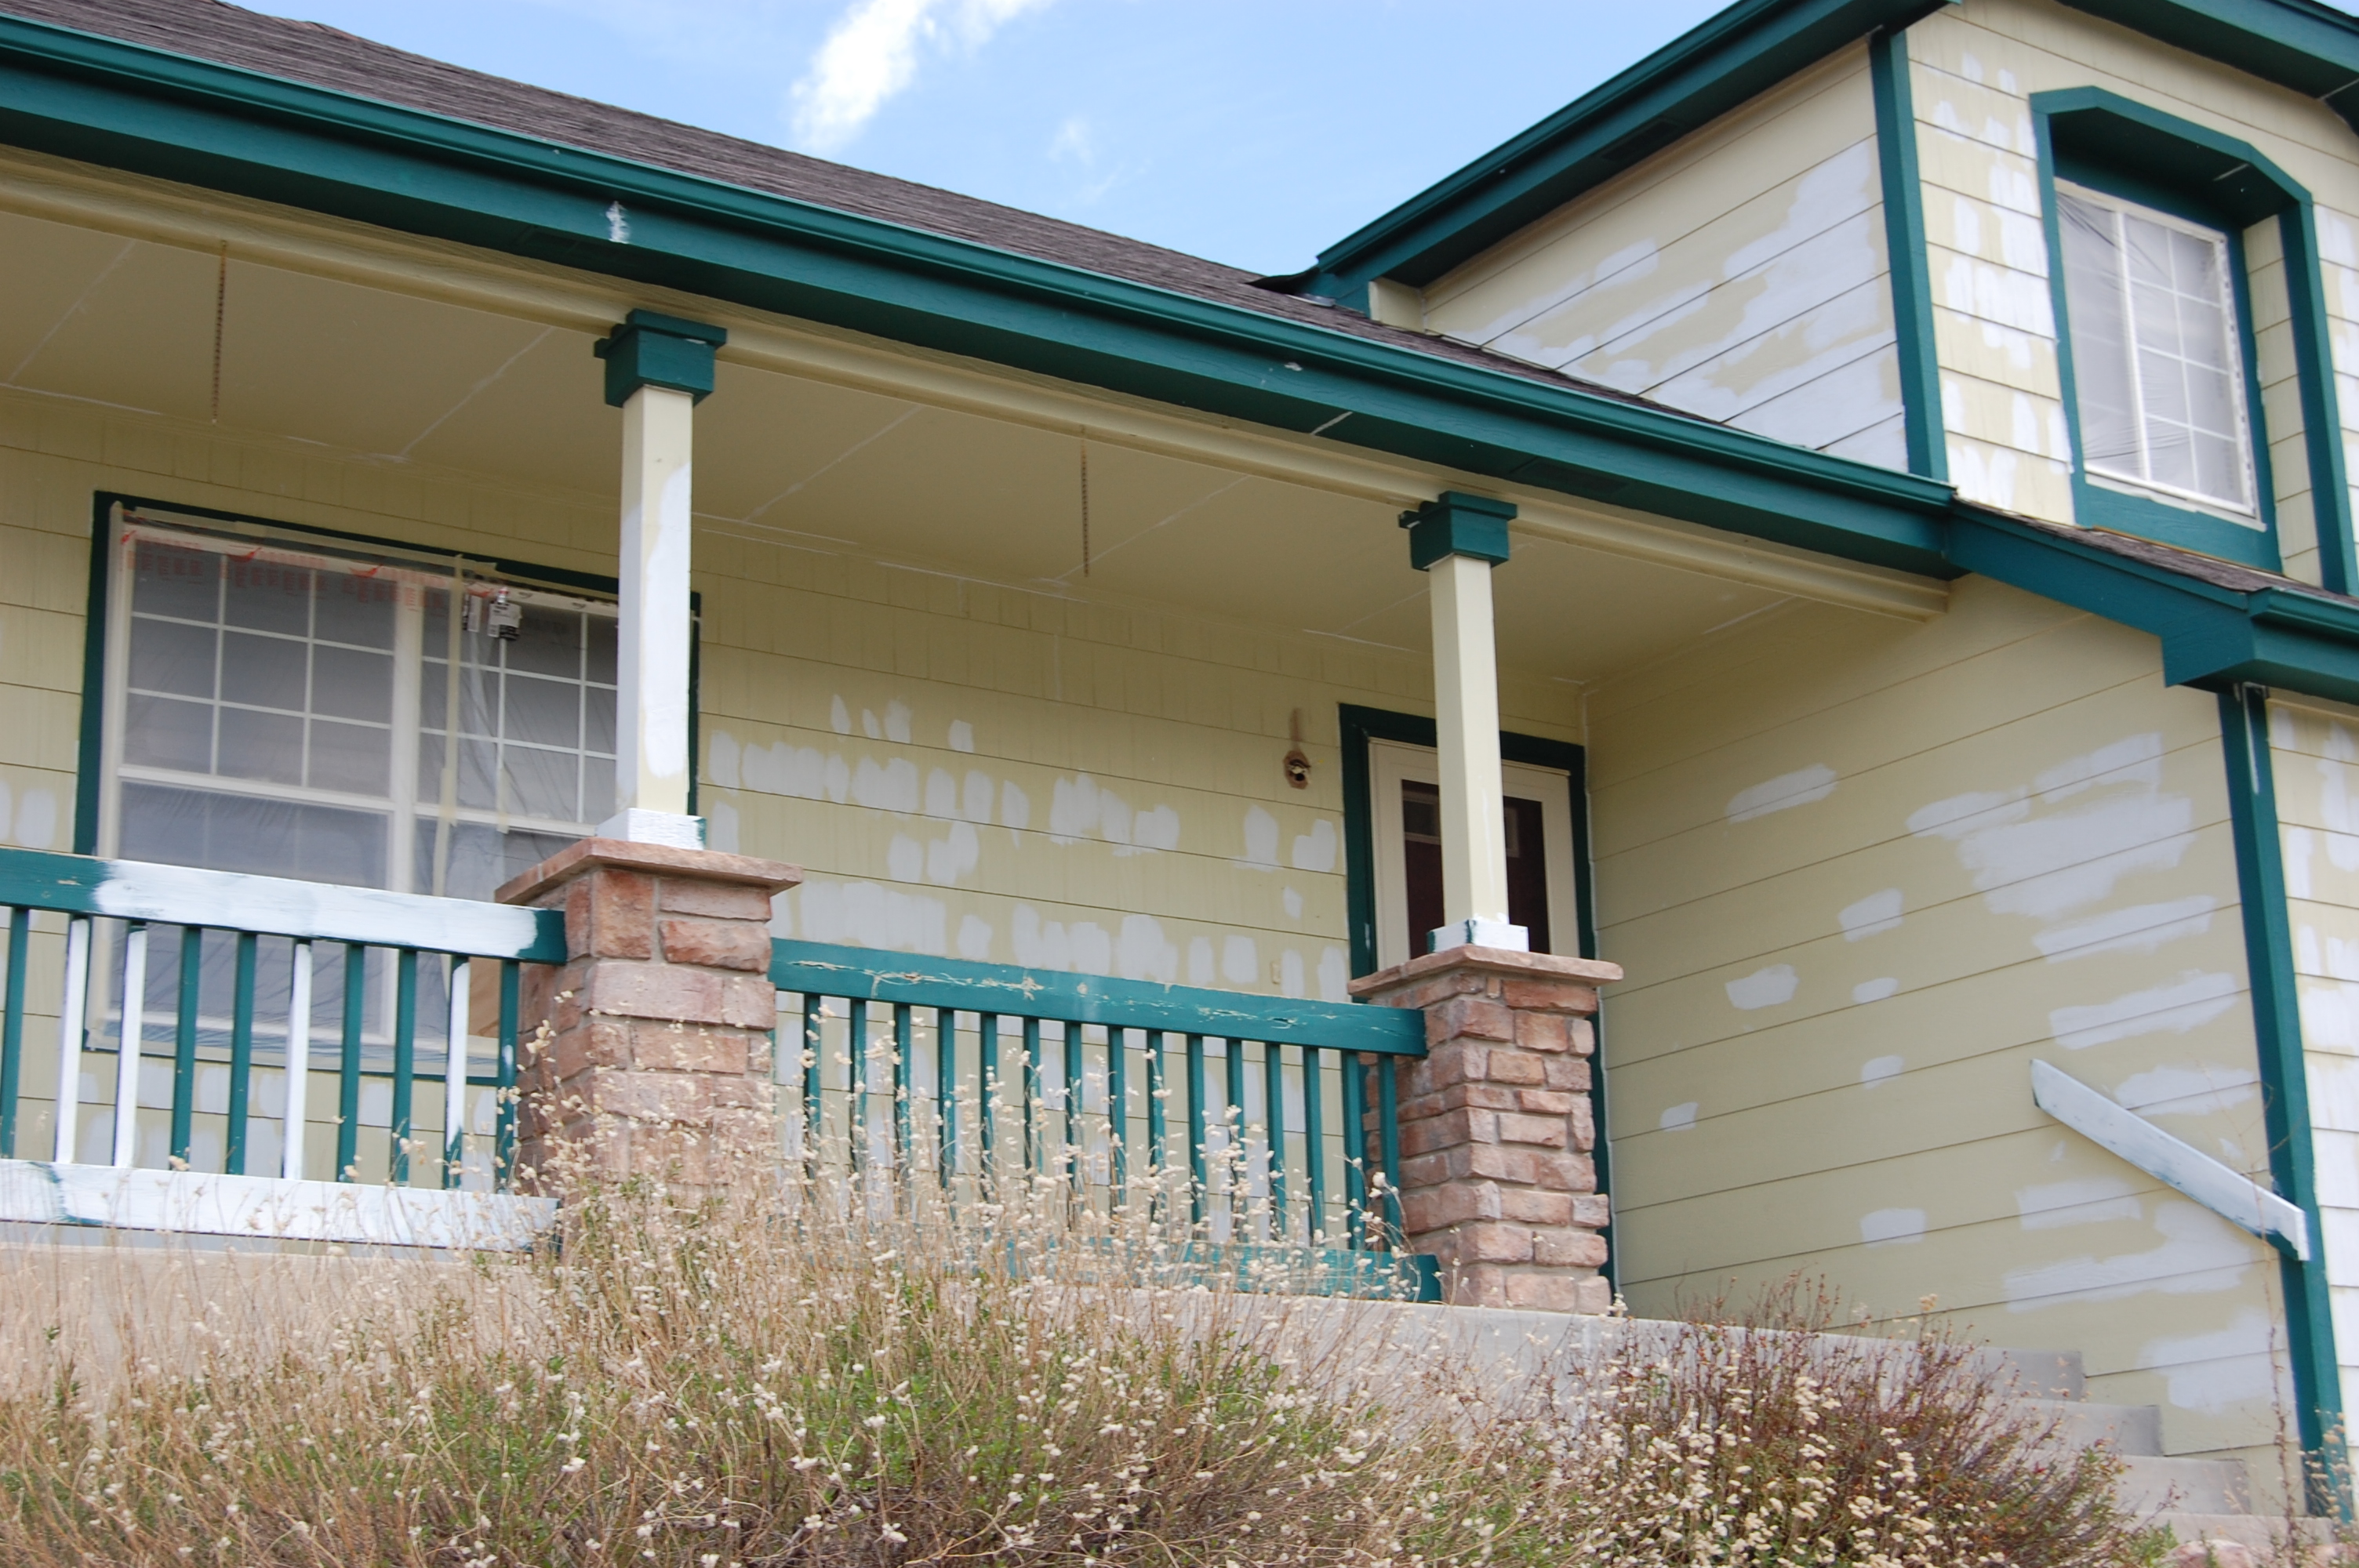 Exterior house painter in Colorado Springs, A Quality Paint Job, is the best value for your painting dollar. We do proper prep work on your exterior paint project.